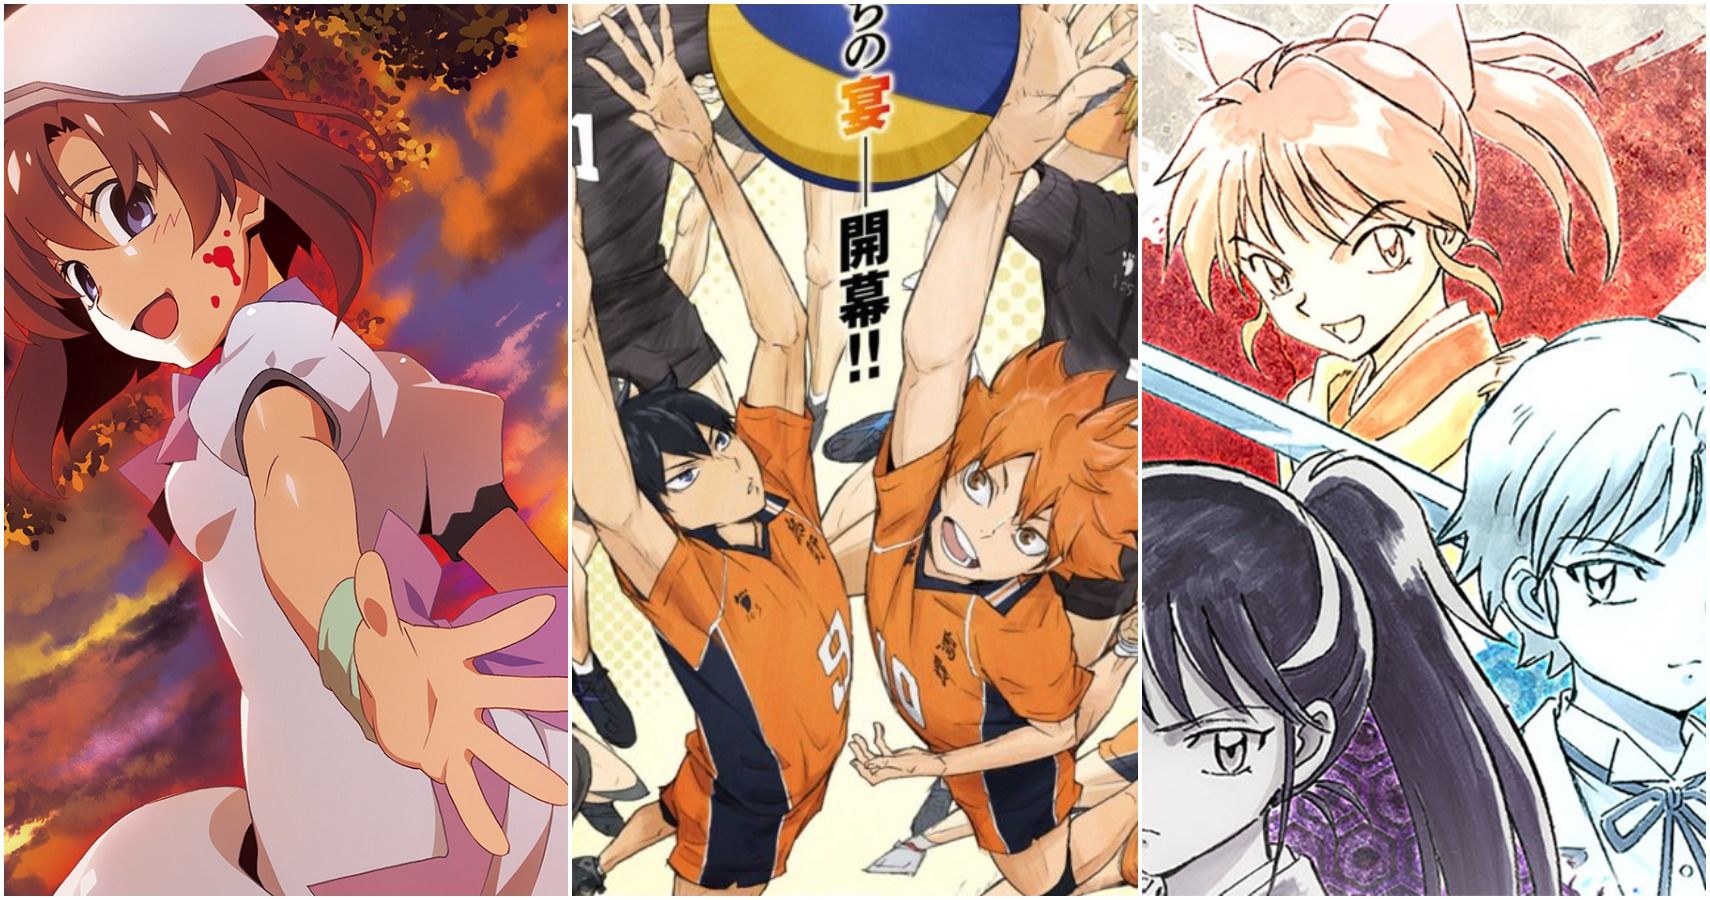 The 10 Fall Anime That People Are Most Excited For Based On Myanimelist